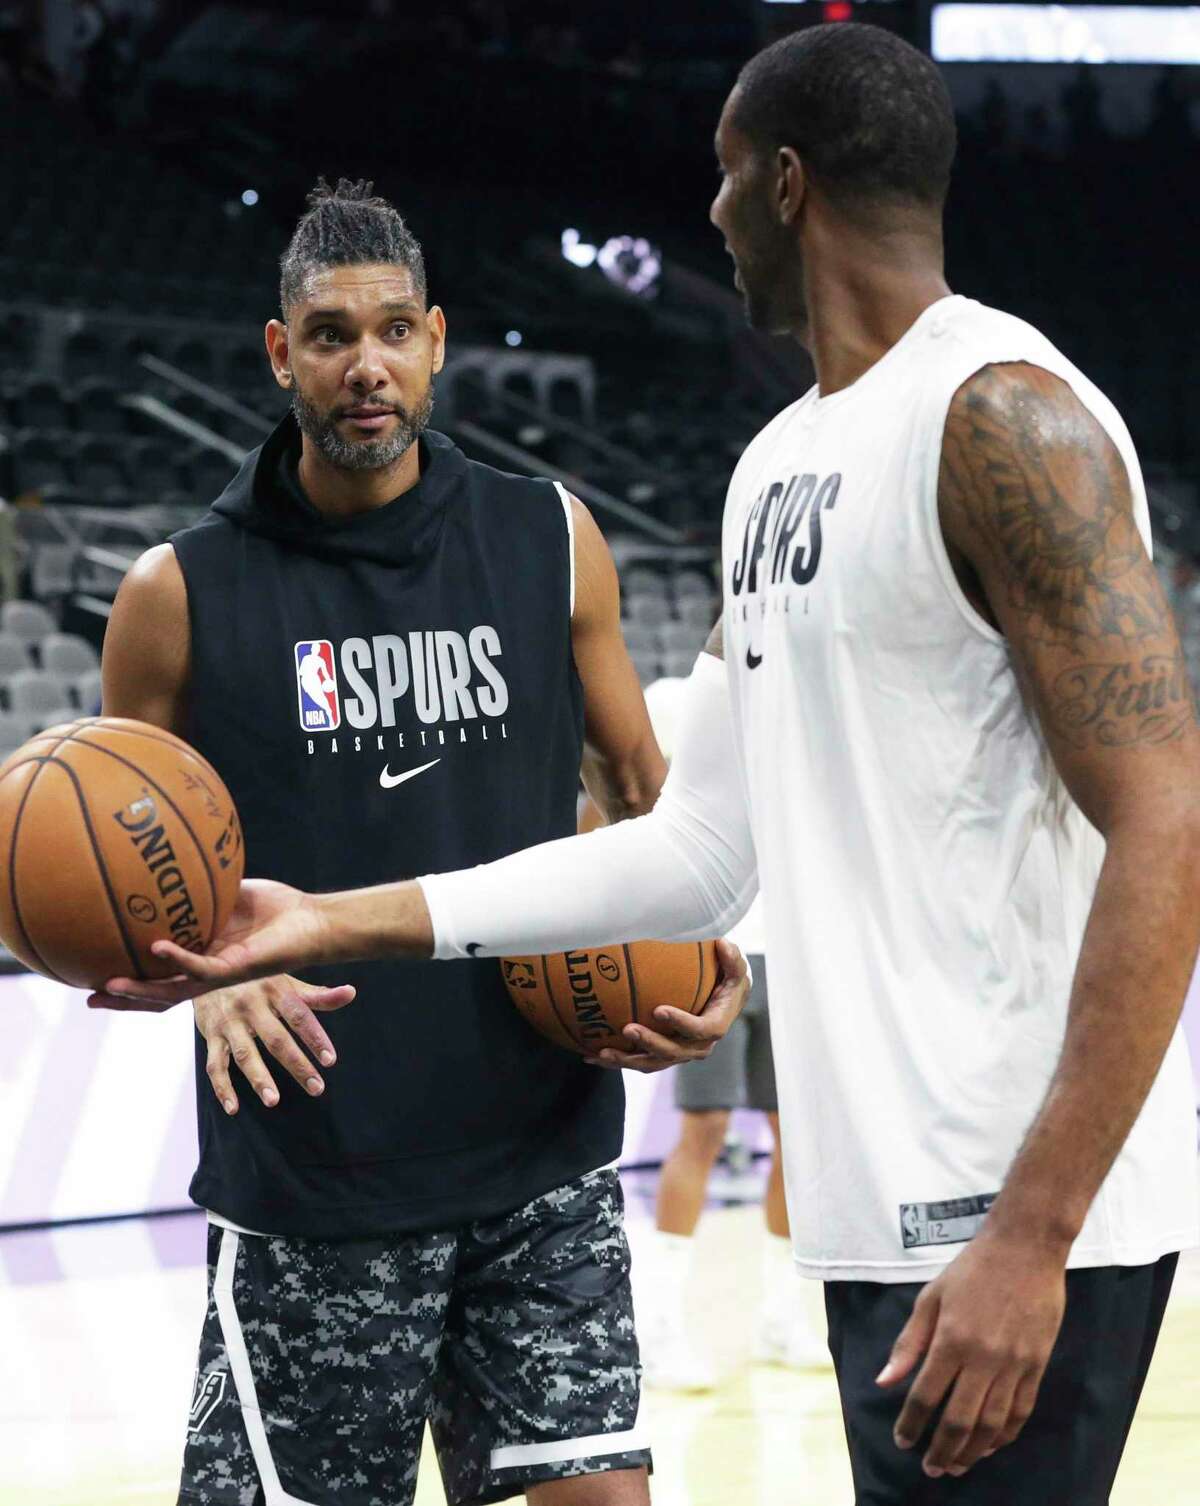 Tim Duncan - Greatest job I've ever had is being their dad. Happy